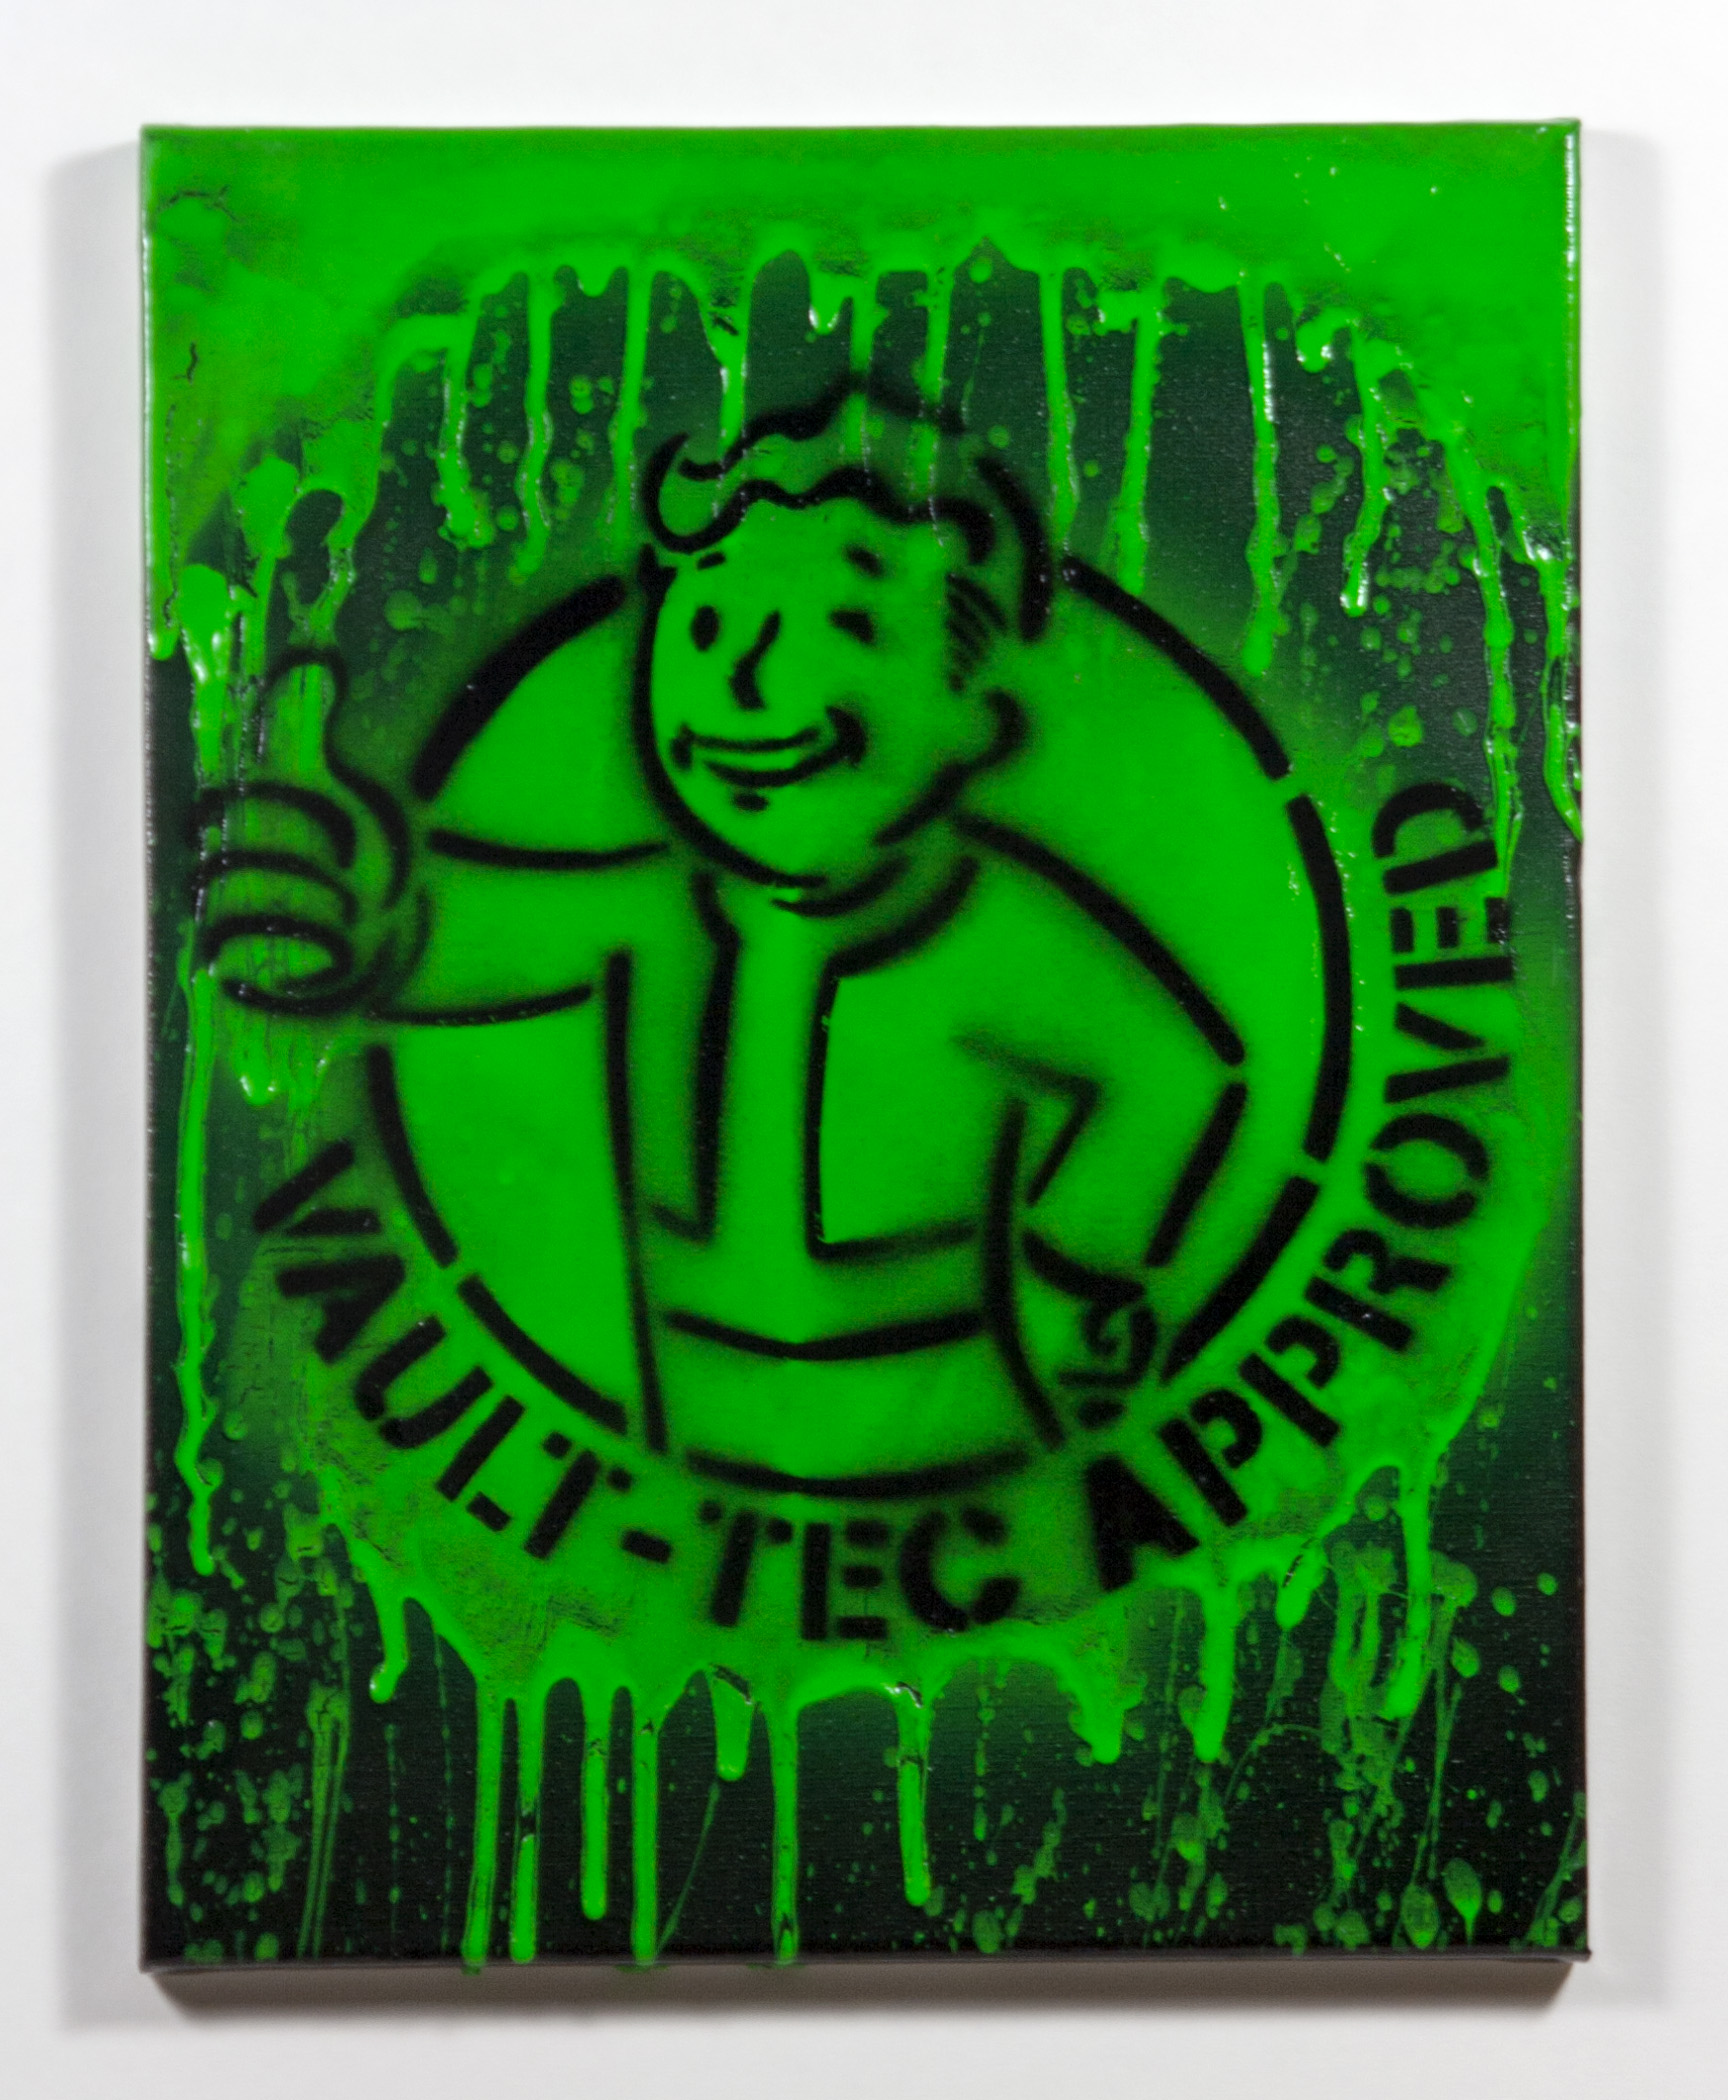 Vault-Tec Approved: Radioactive Edition - 2017